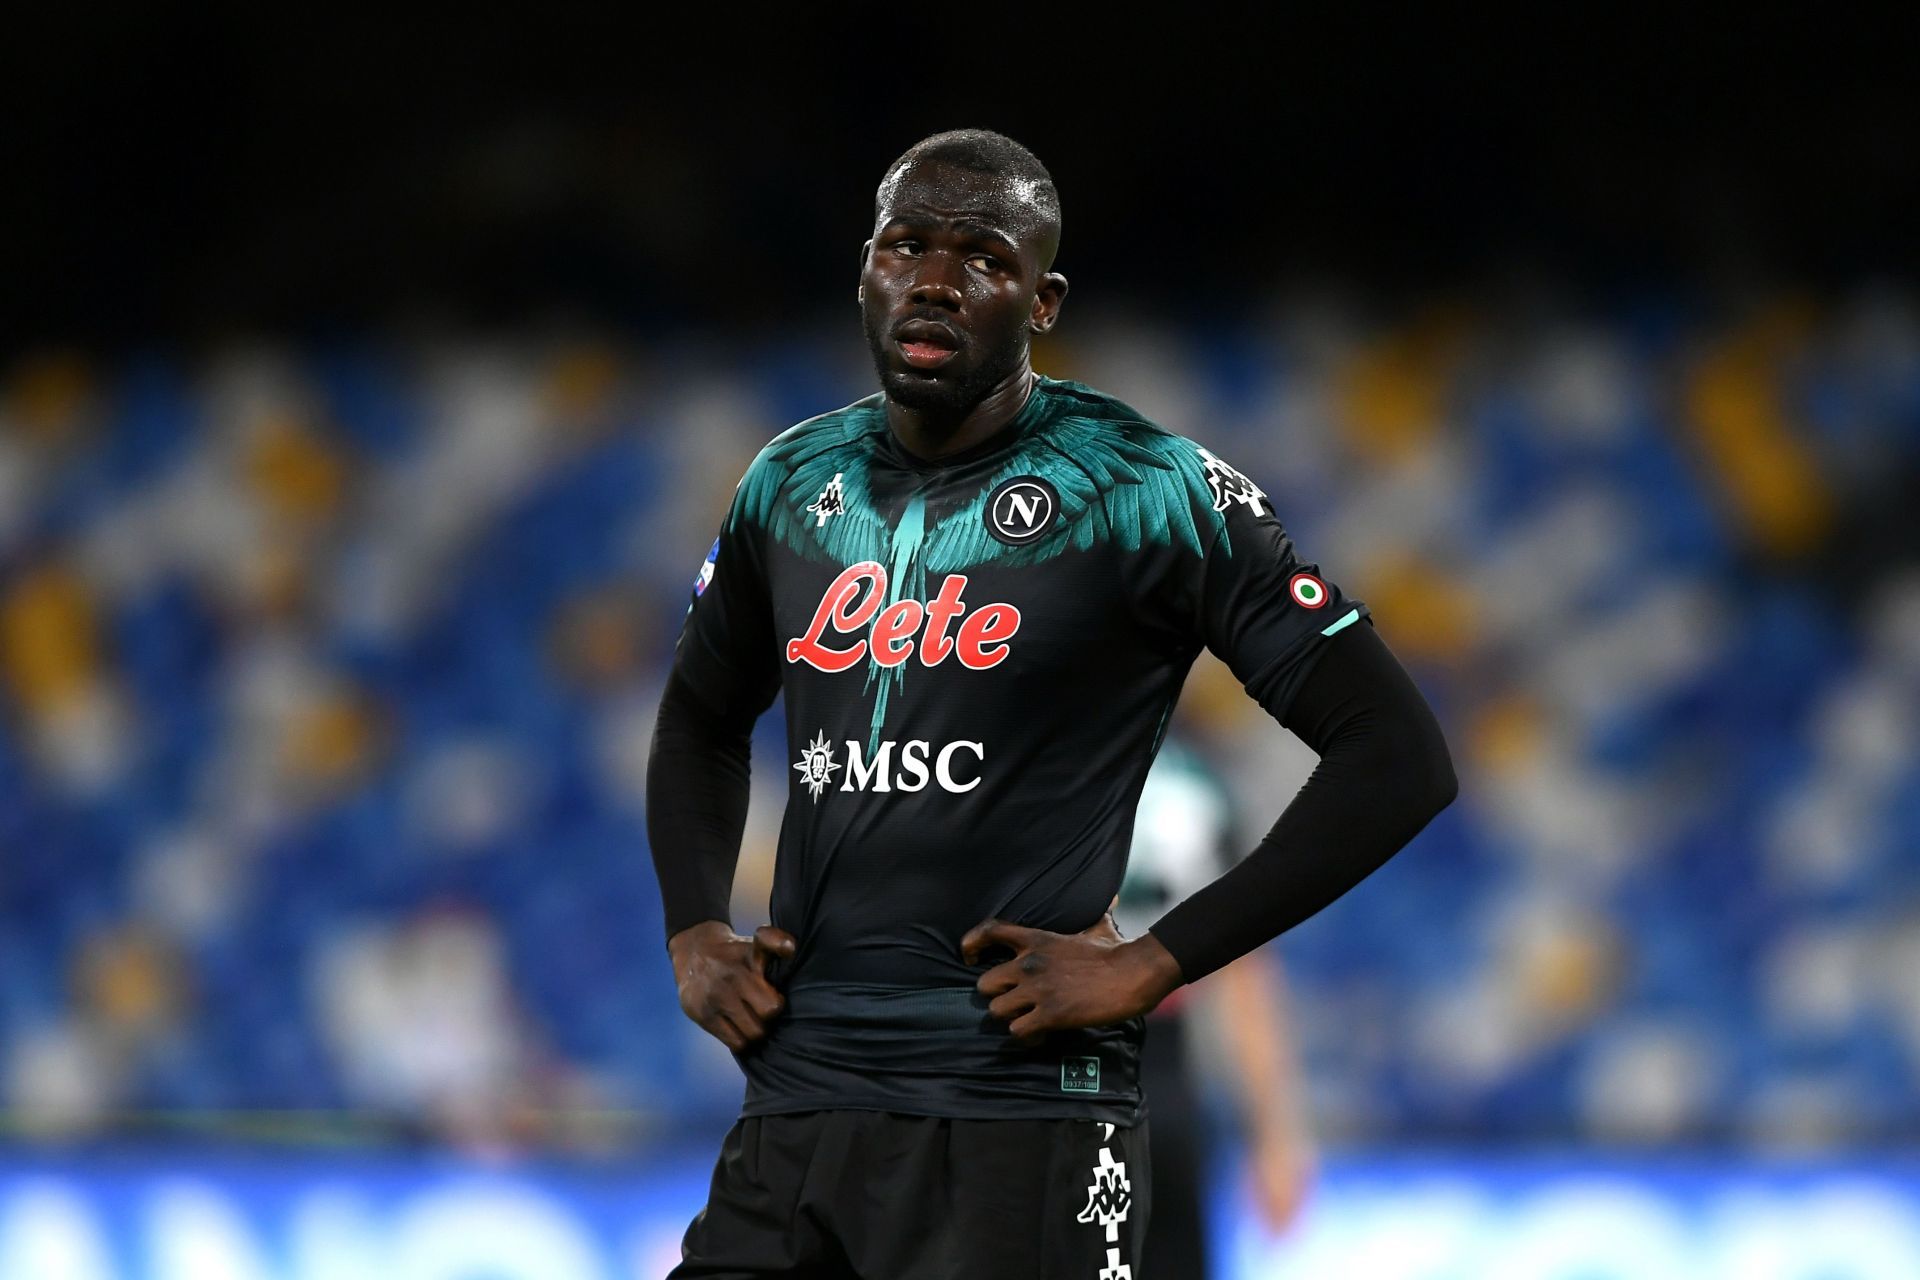 Koulibaly in action for Napoli